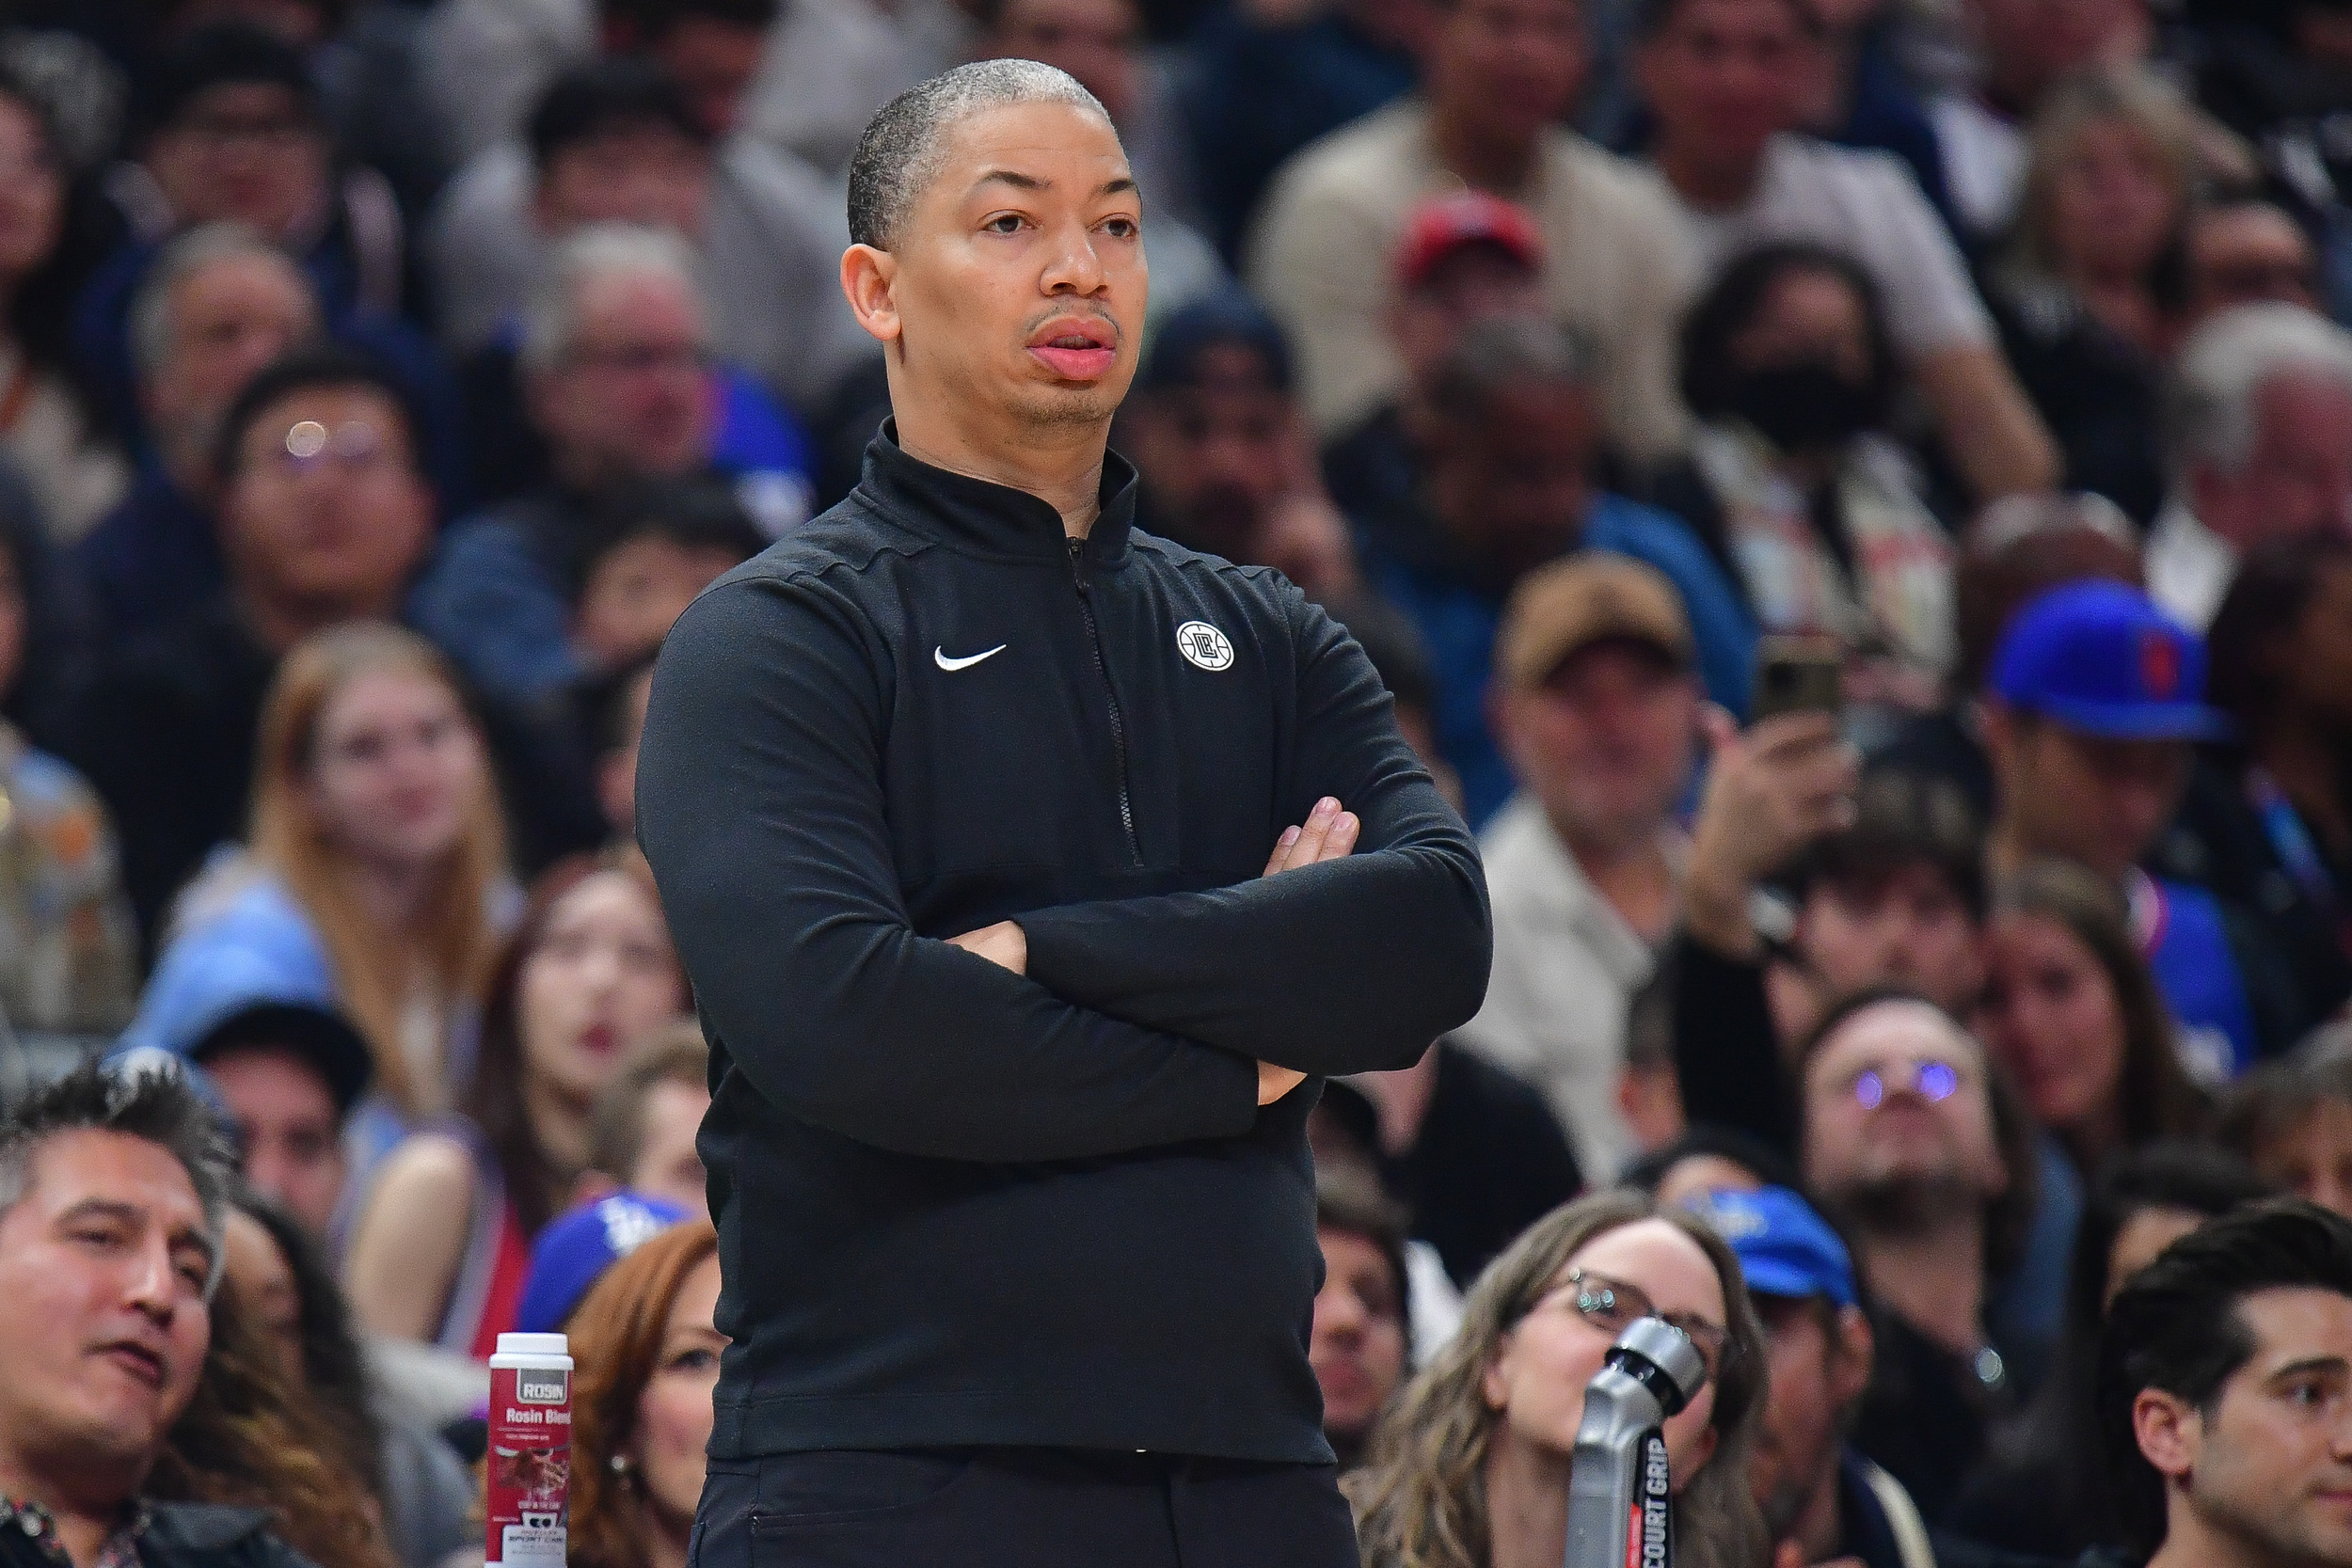 clippers hc tyronn lue fined for comments about officiating